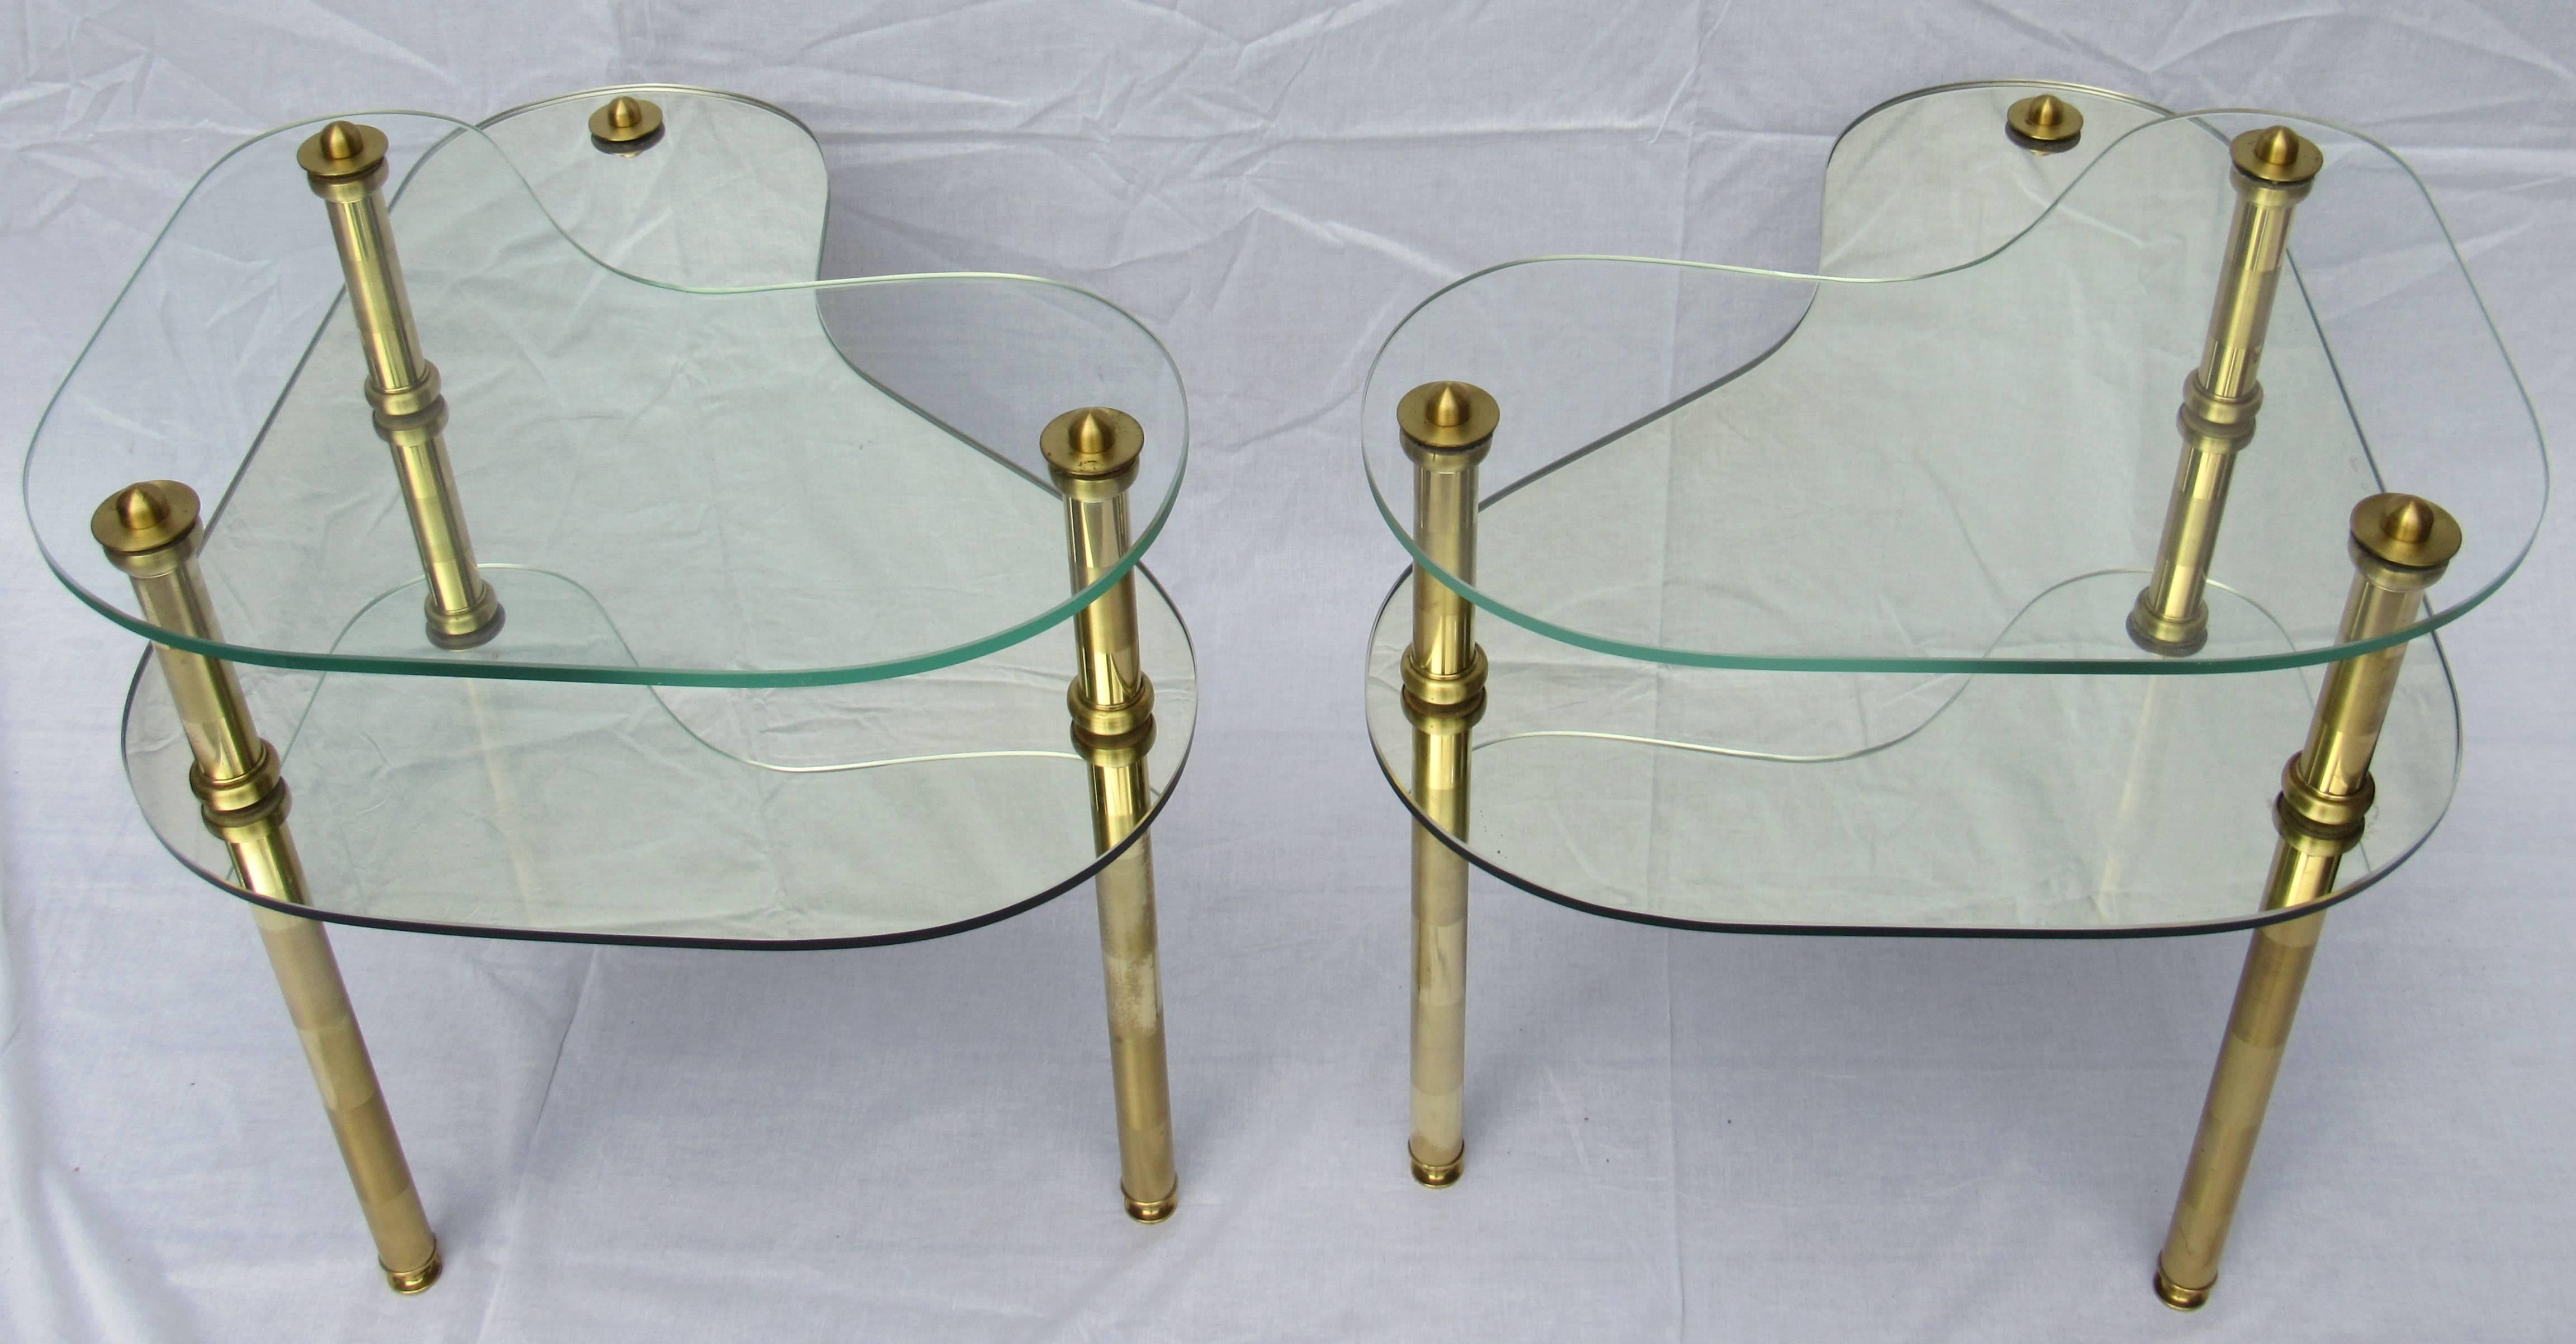 American Semon Bache Pair of Chased Brass and Mirrored Glass End Tables from 1959 For Sale